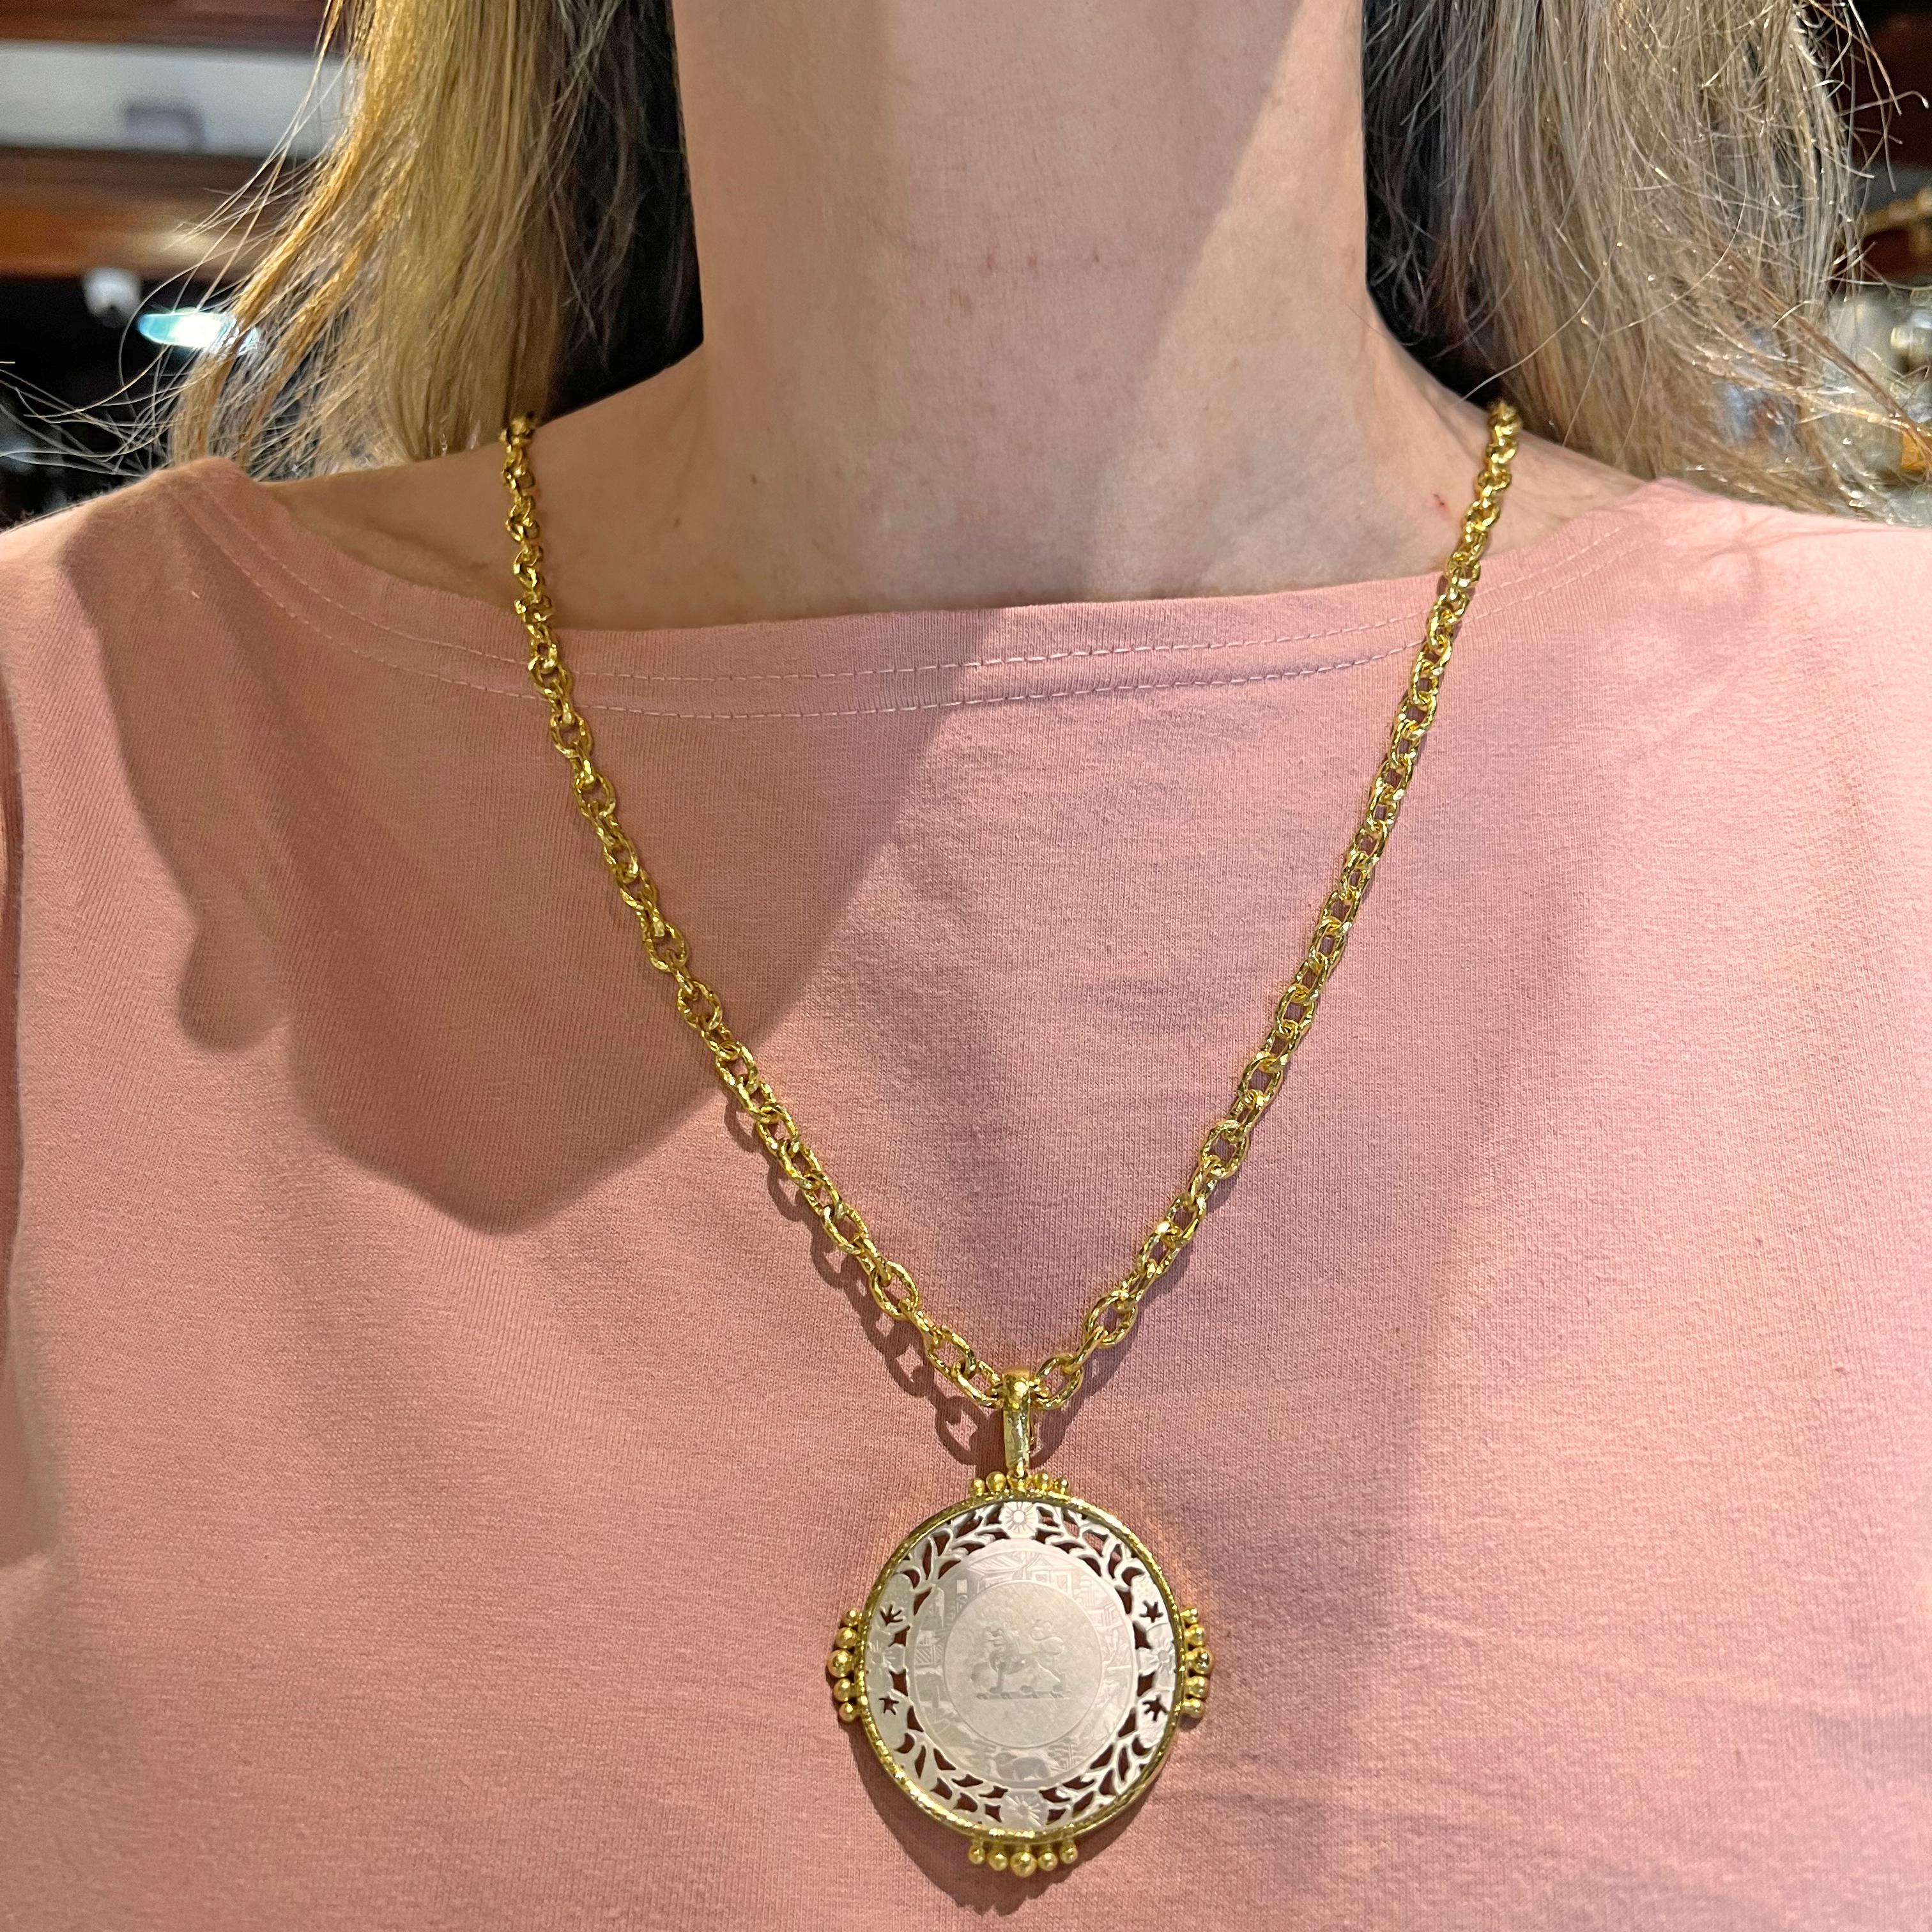 This Elizabeth Locke pendant features a circular-shaped mother-of-pearl Chinese gambling counter bezel-set in 19k yellow gold. The delicate piercings and intricate carvings, create a stunning visual effect, bringing a touch of old-world charm to the